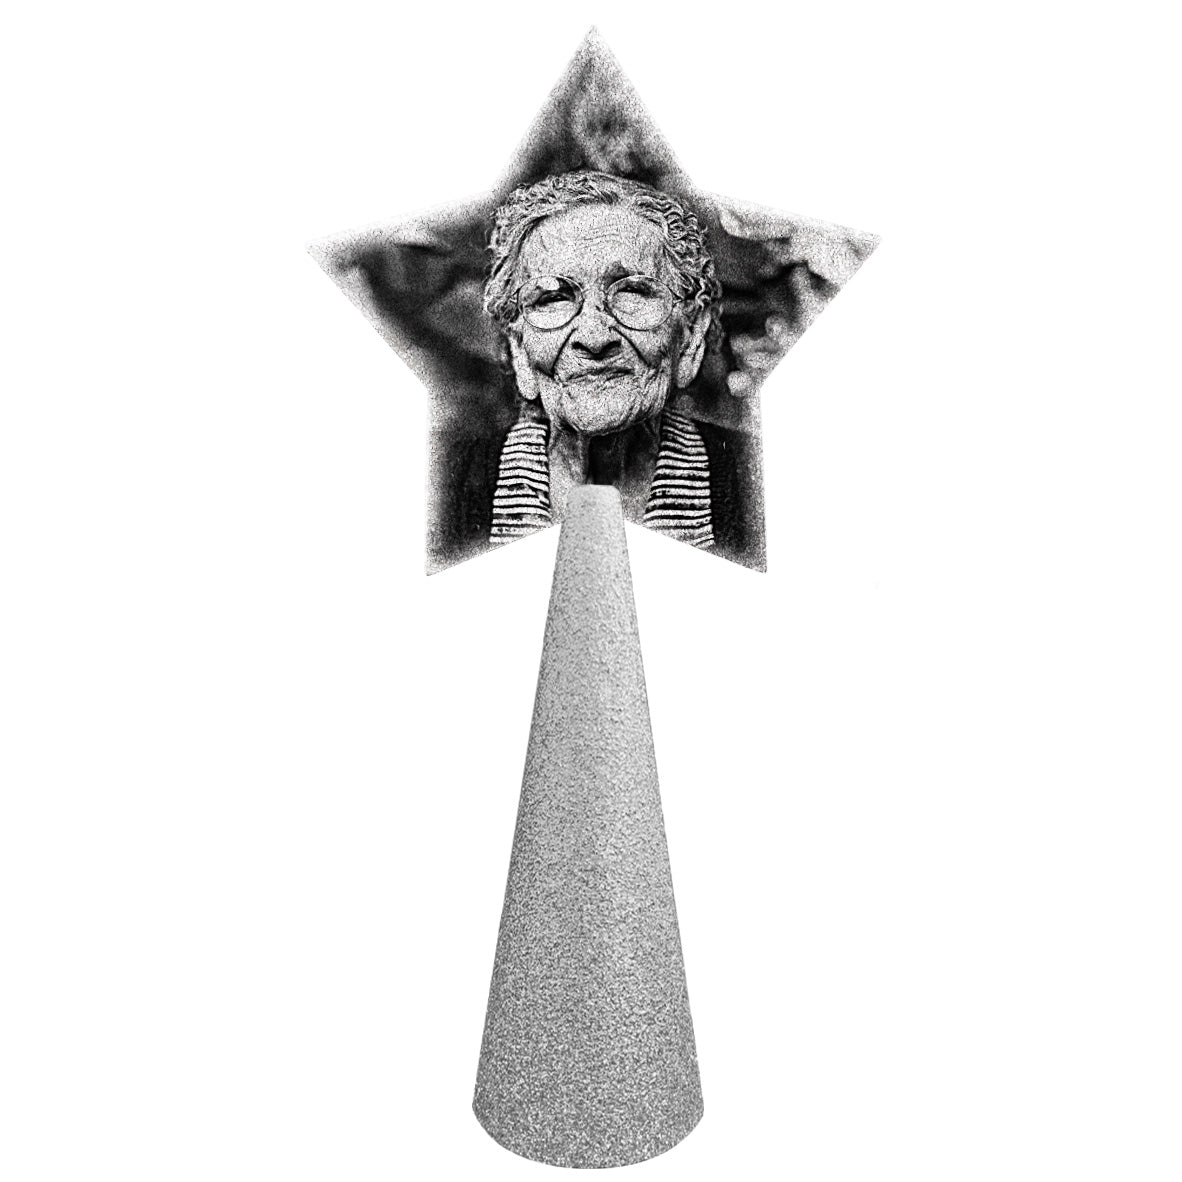 "Nana" black and white photo of smiling old woman on custom christmas tree topper - star photo on silver glitter cone